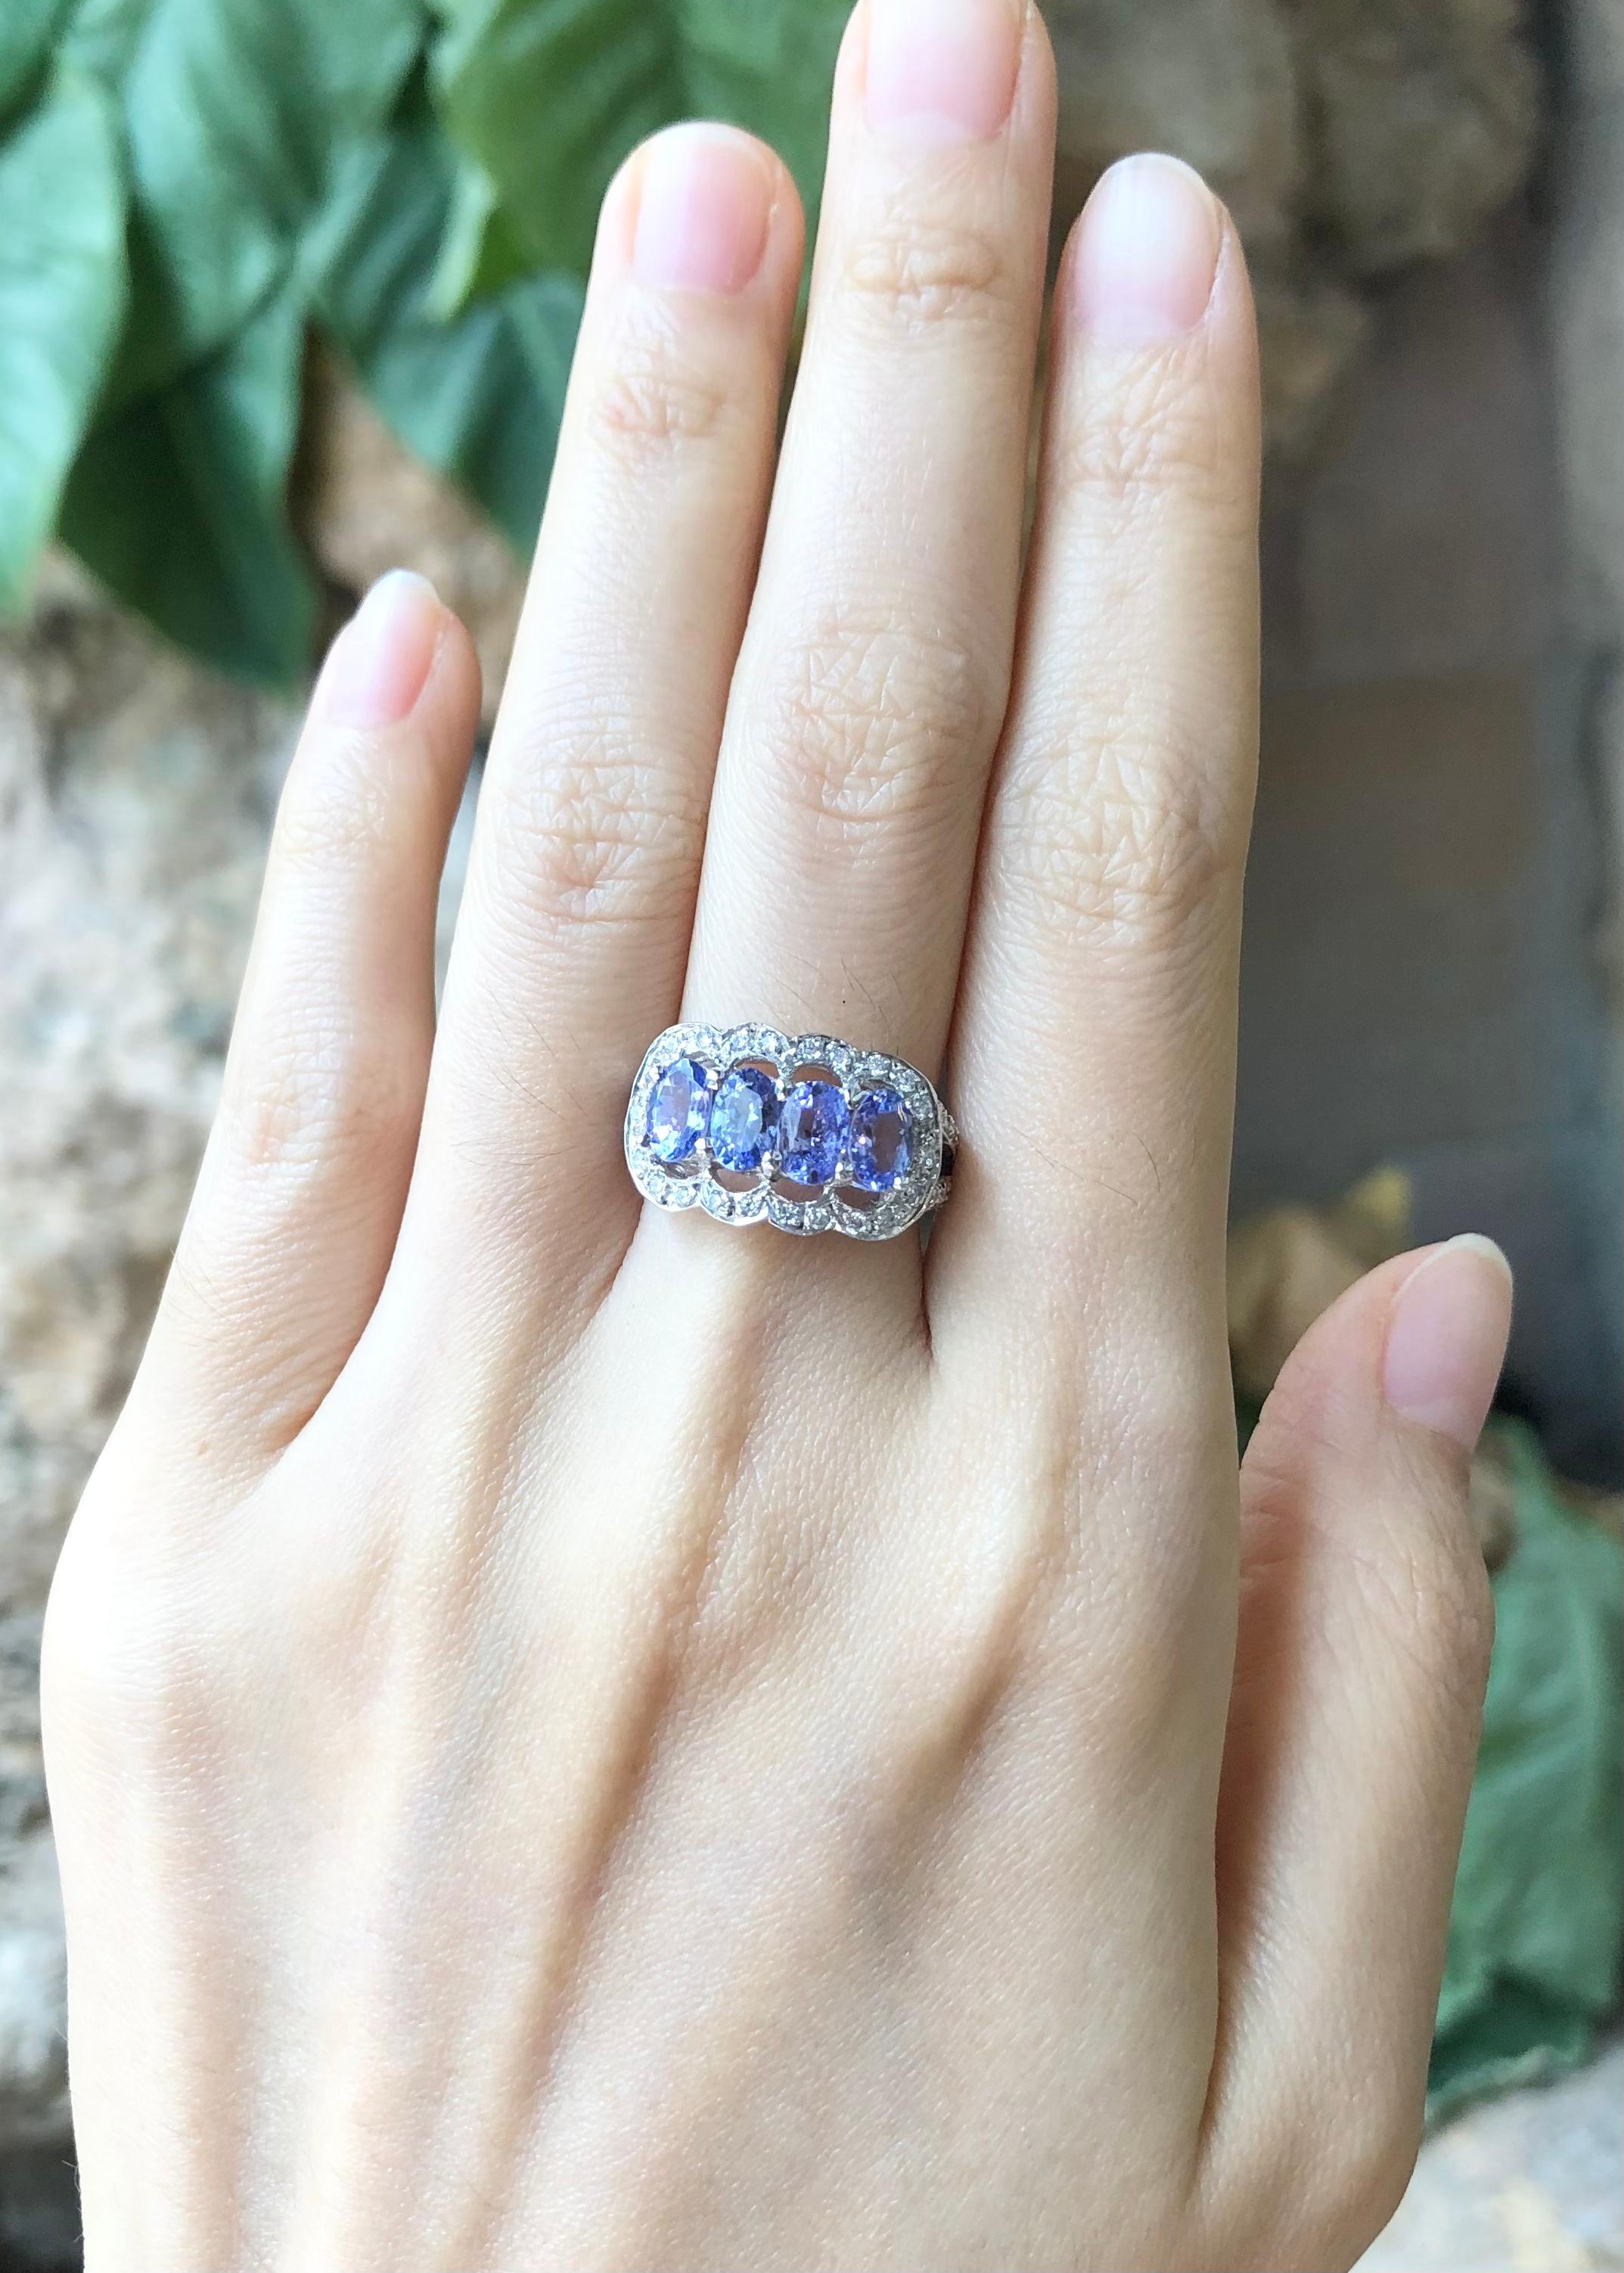 Tanzanite with Cubic Zirconia Ring set in Silver Settings

Width:  1.8 cm 
Length: 1.1 cm
Ring Size: 53
Total Weight: 4.25 grams

*Please note that the silver setting is plated with rhodium to promote shine and help prevent oxidation.  However, with